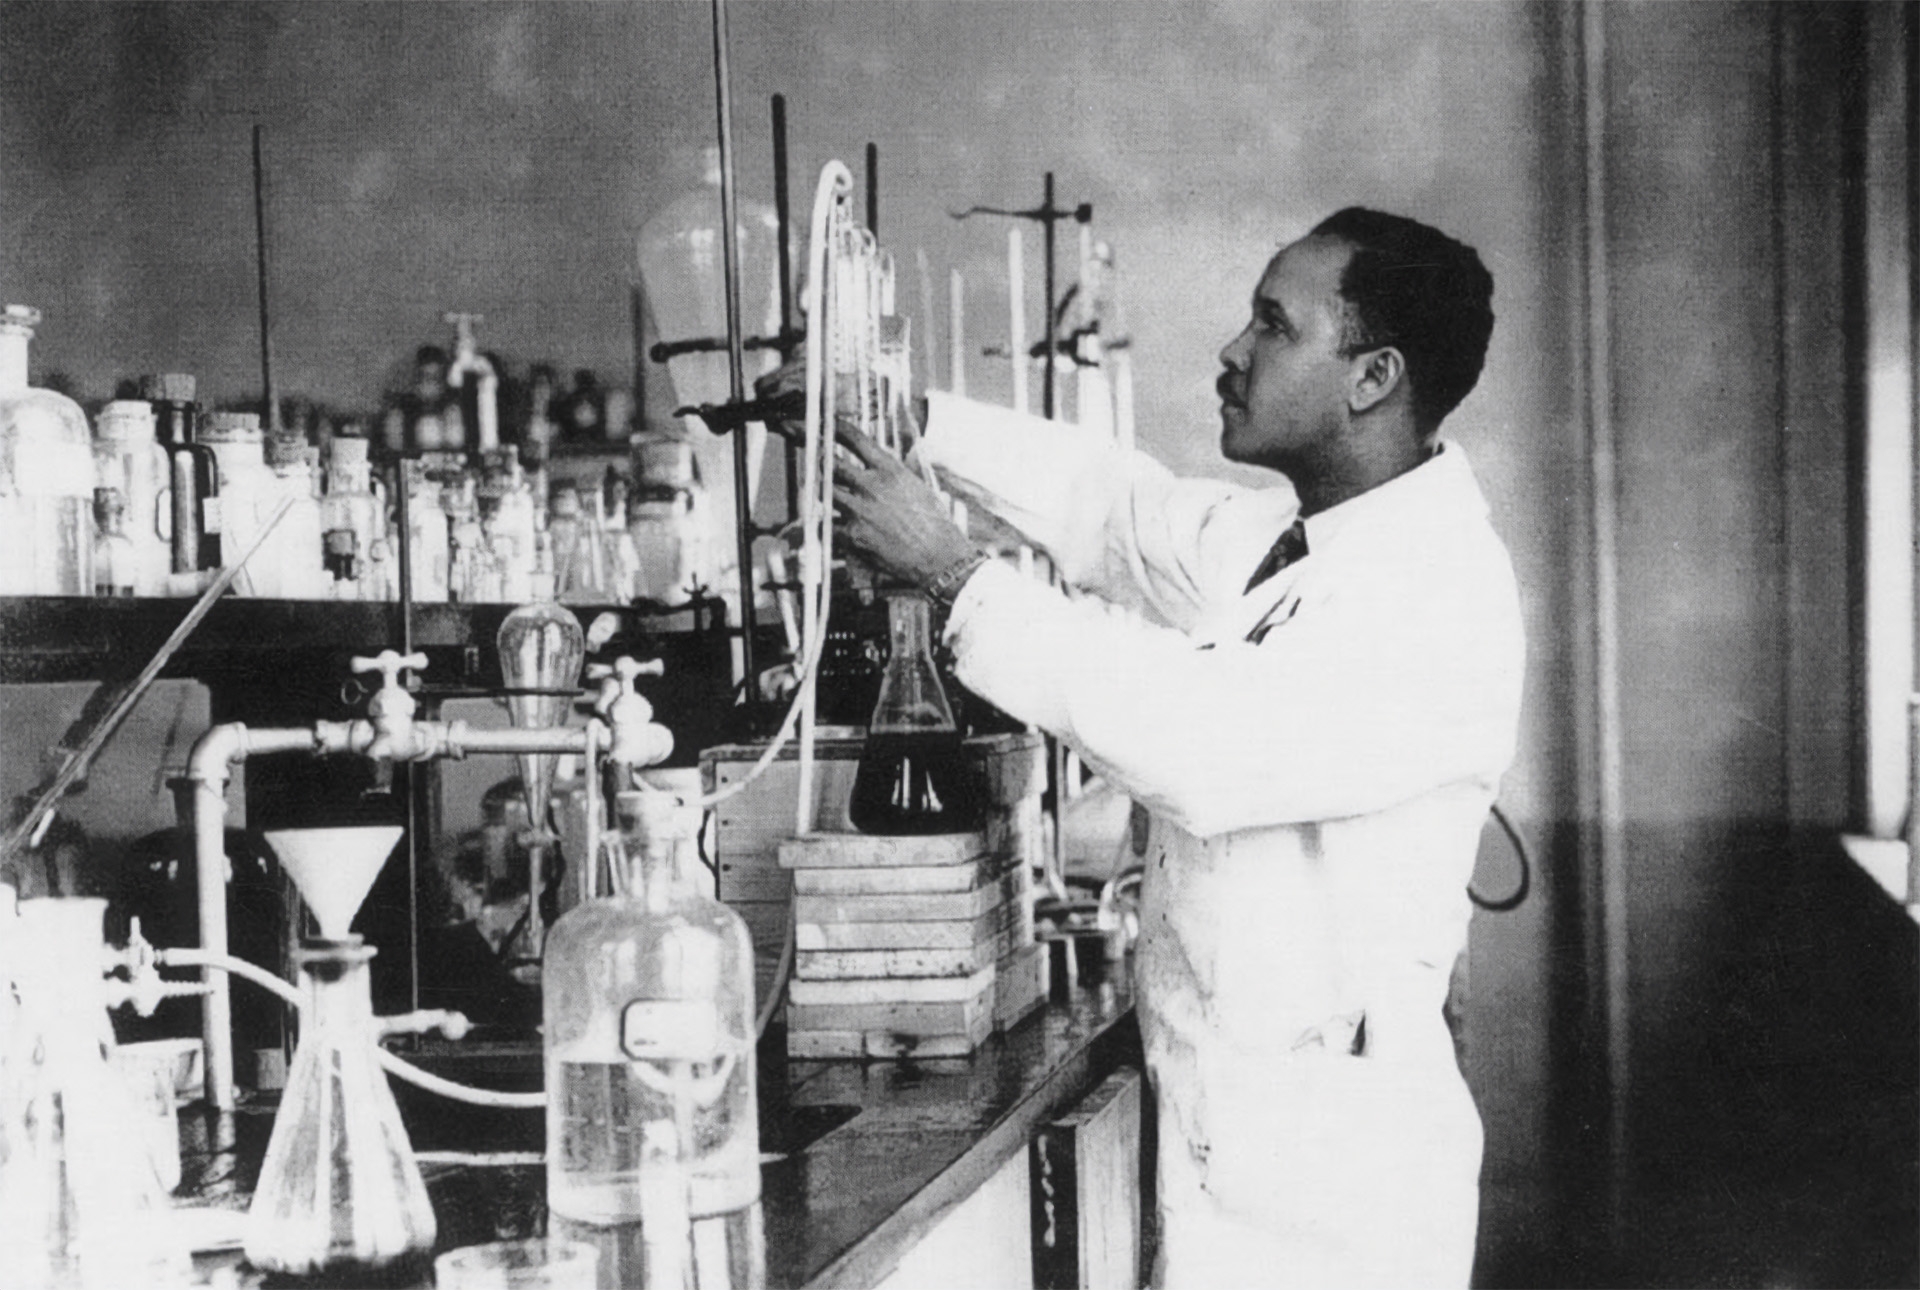 Dr. Percy Julian was a renowned chemist and entrepreneur who discovered ways to synthesize medical compounds from plant materials, making steroids more affordable and therefore available to more people. His medicinal formulations are used to treat glaucoma, rheumatoid arthritis, and helped women to carry pregnancies to full term.